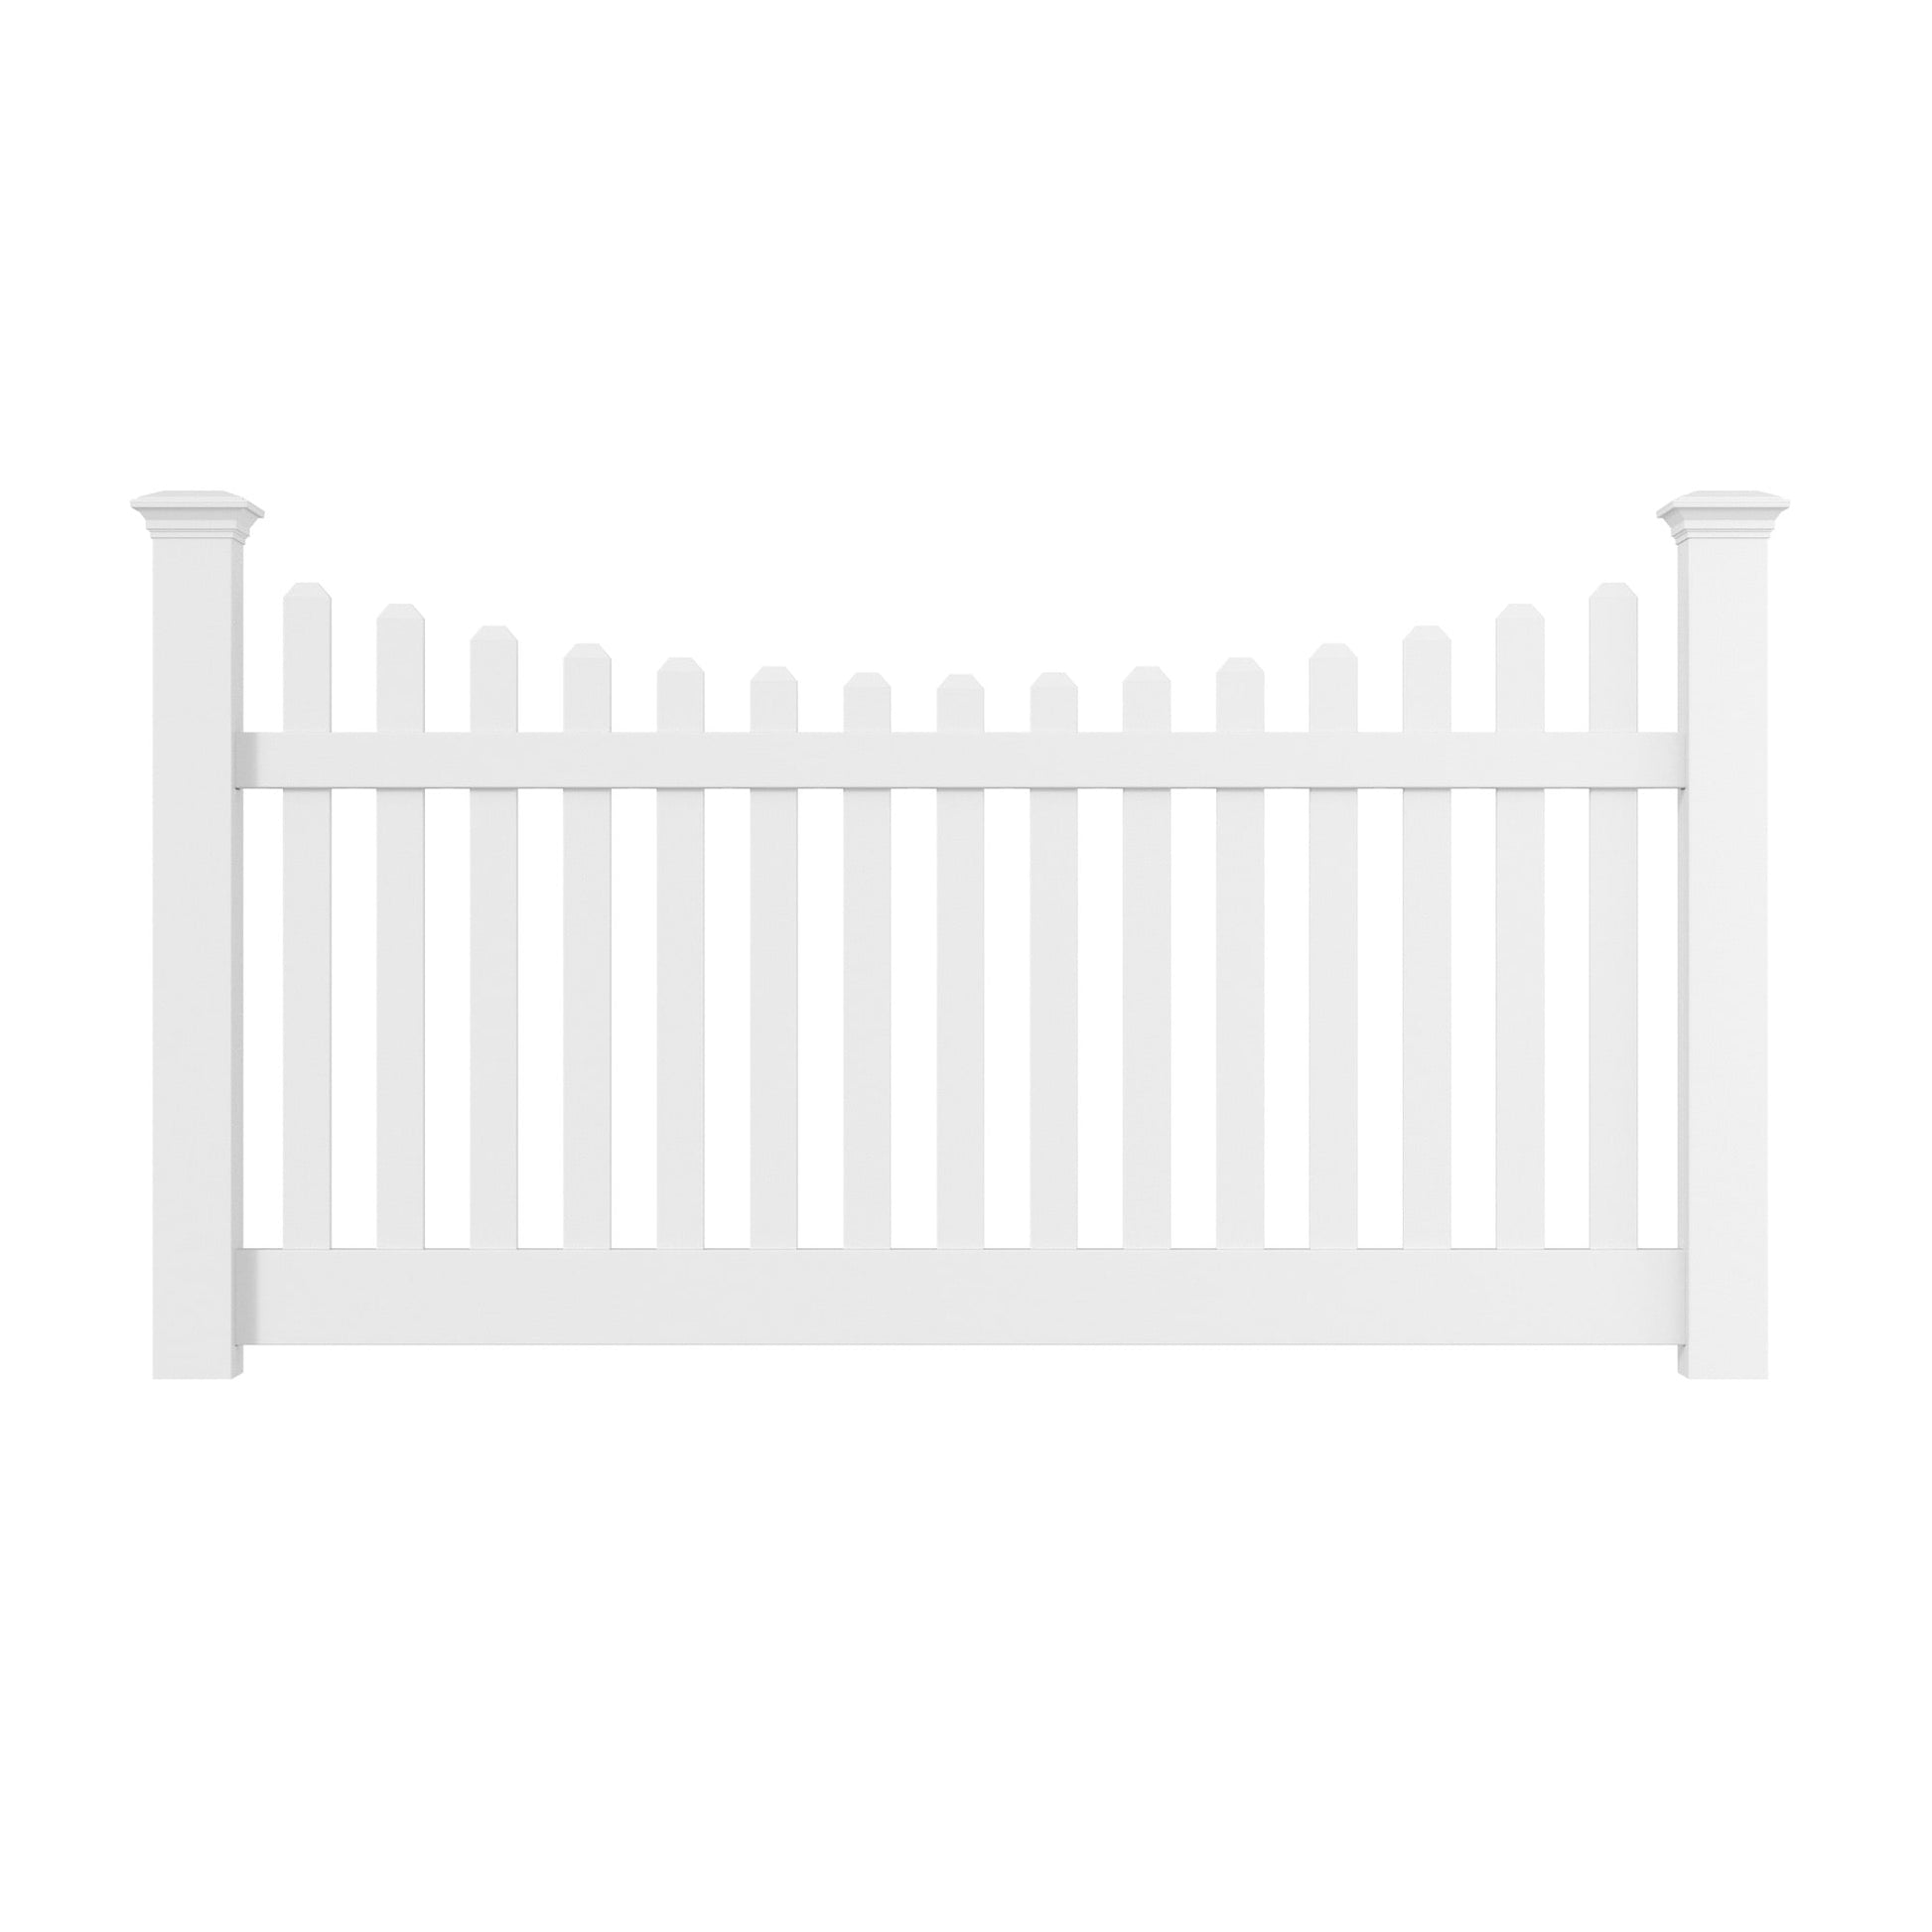 Silverbell Scallop Haven Series - Fence Panel - 4' x 8'-Vinyl Fence Panels-ActiveYards-White-FenceCenter